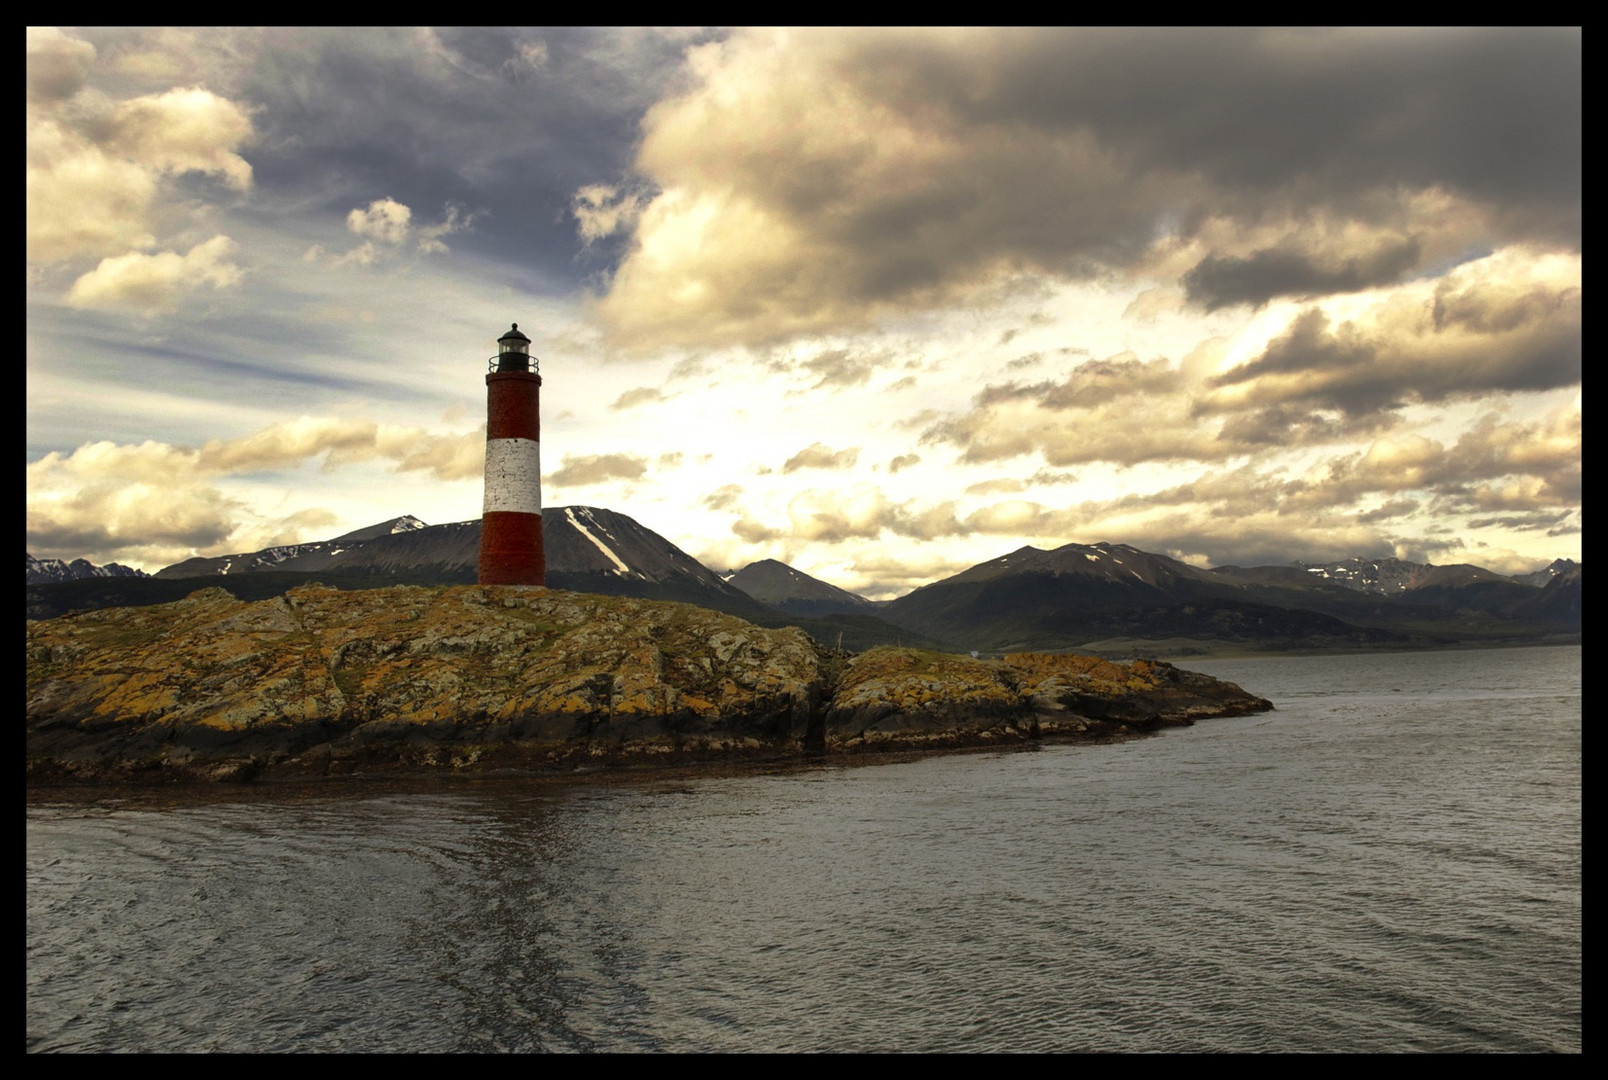 Lighthouse - Beagle's channel